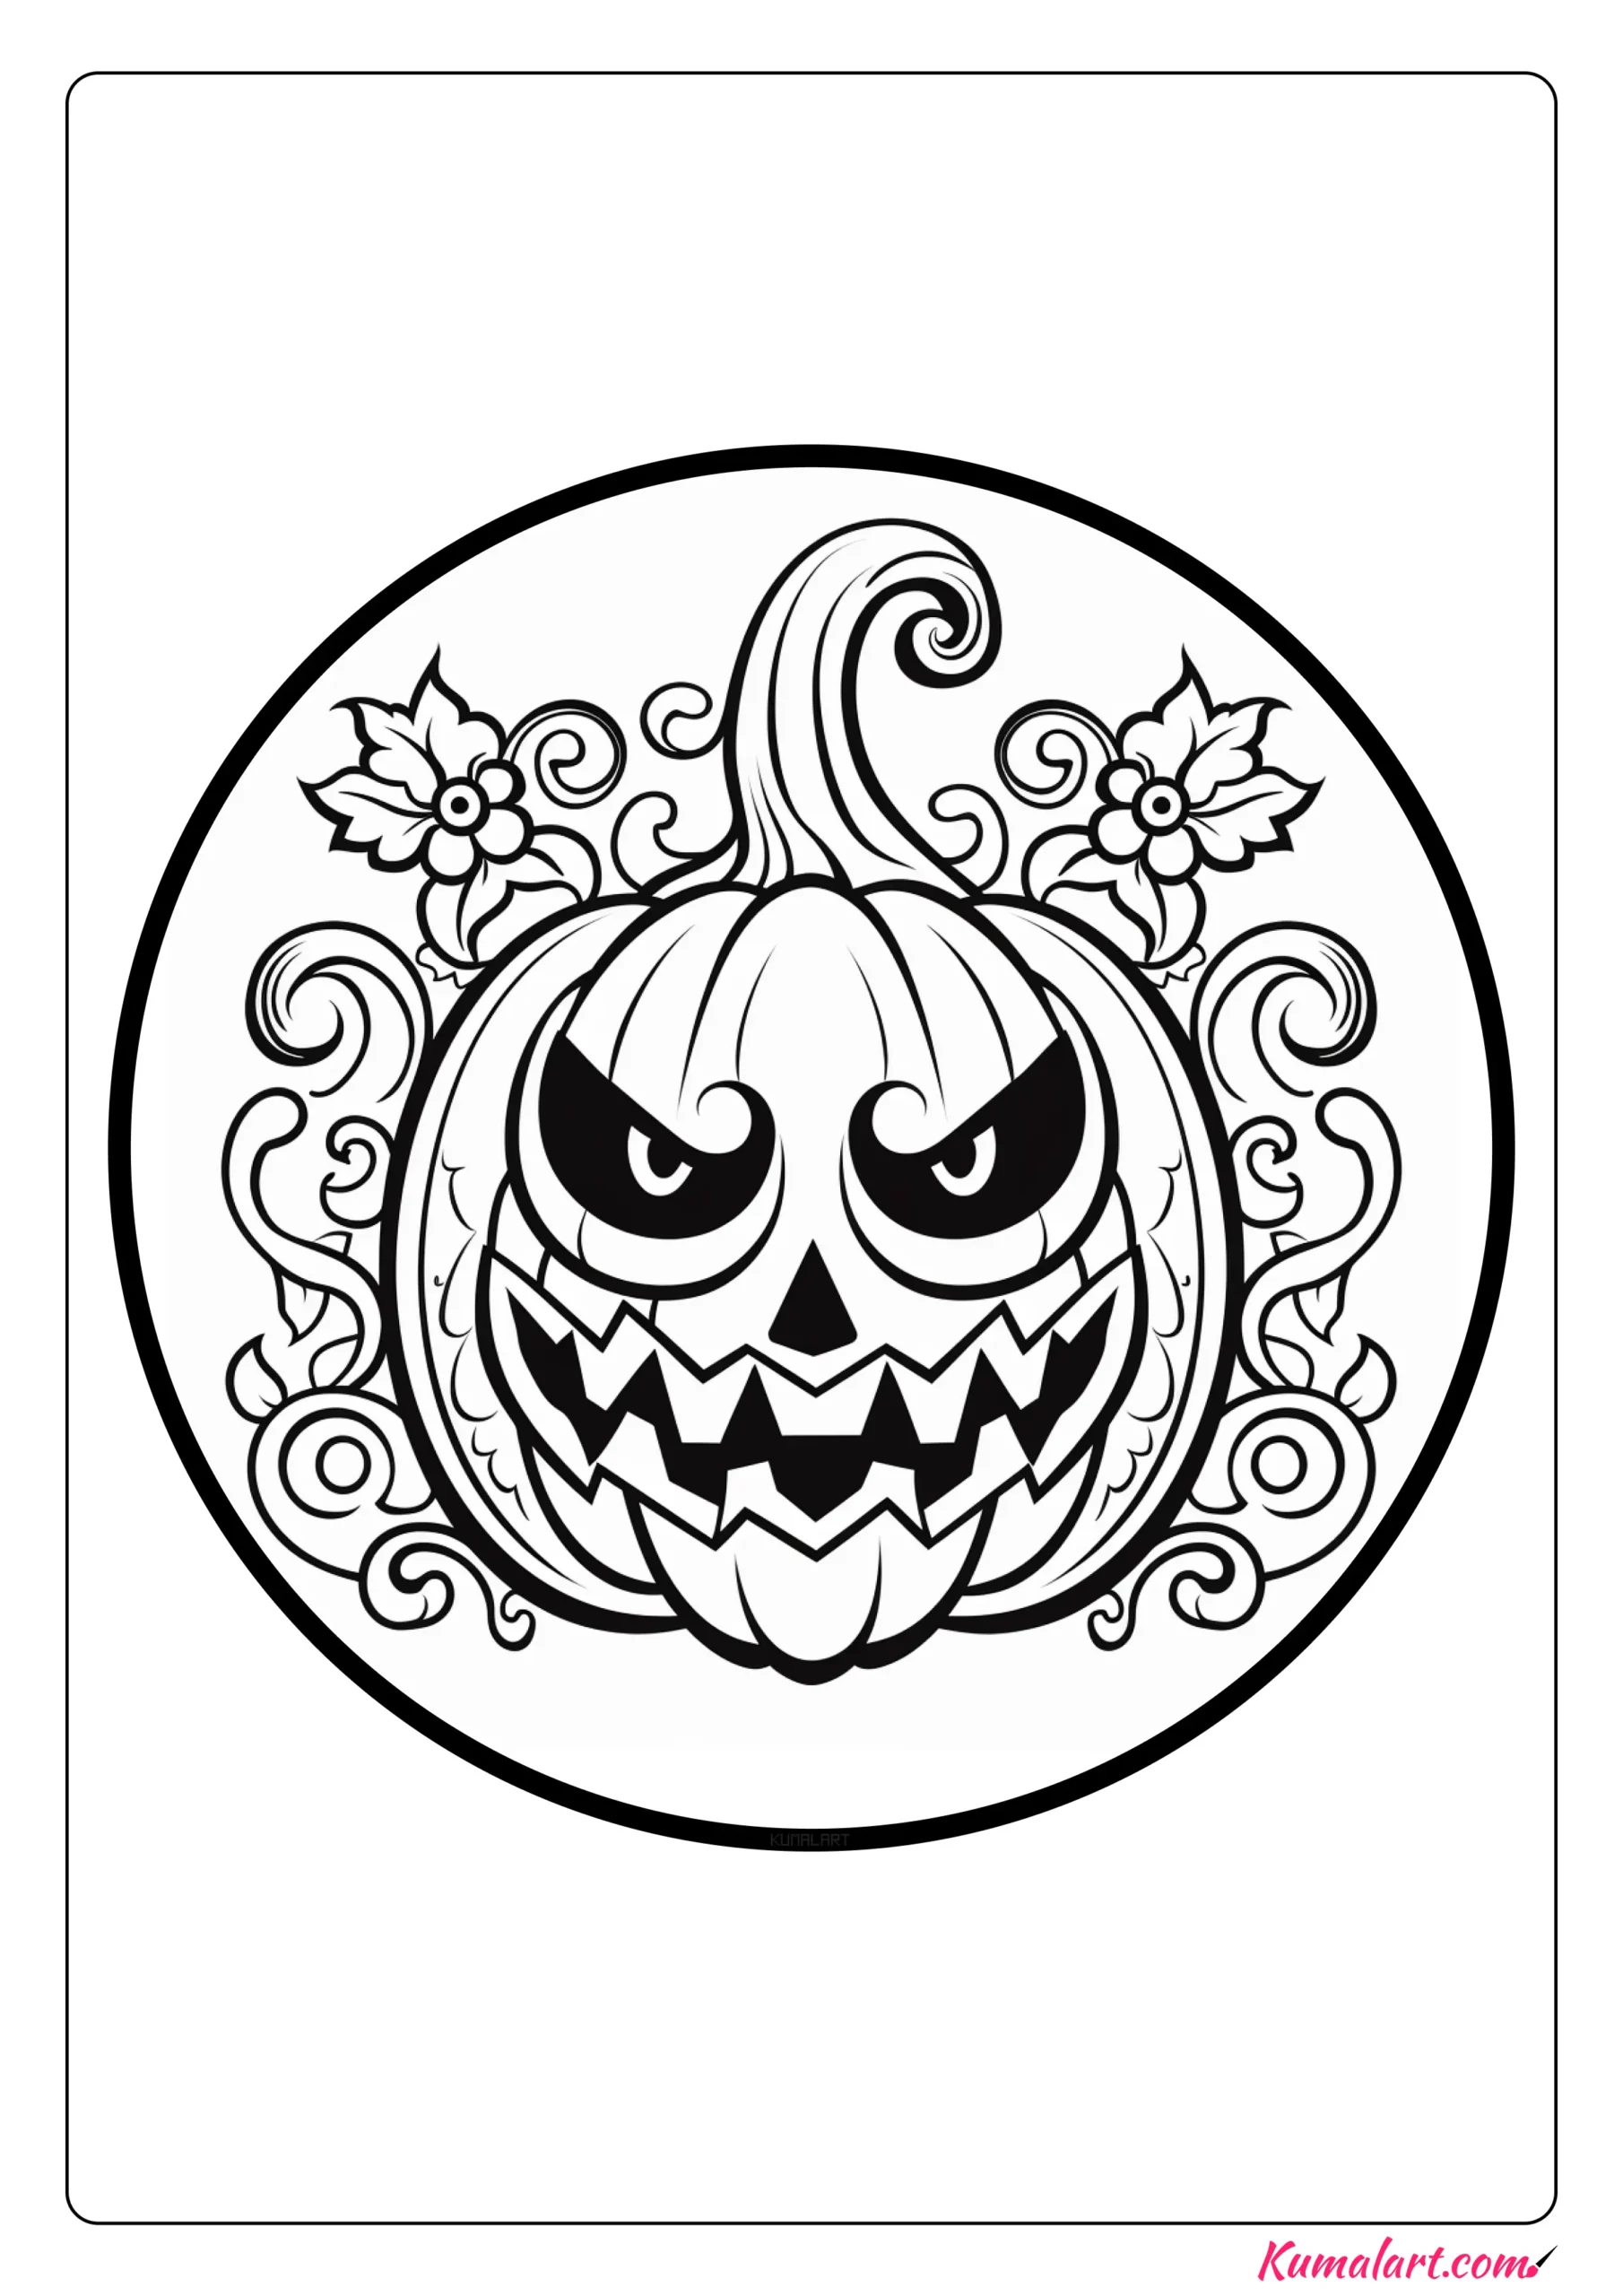 Ðeerie scary pumpkin coloring pages explore download and color